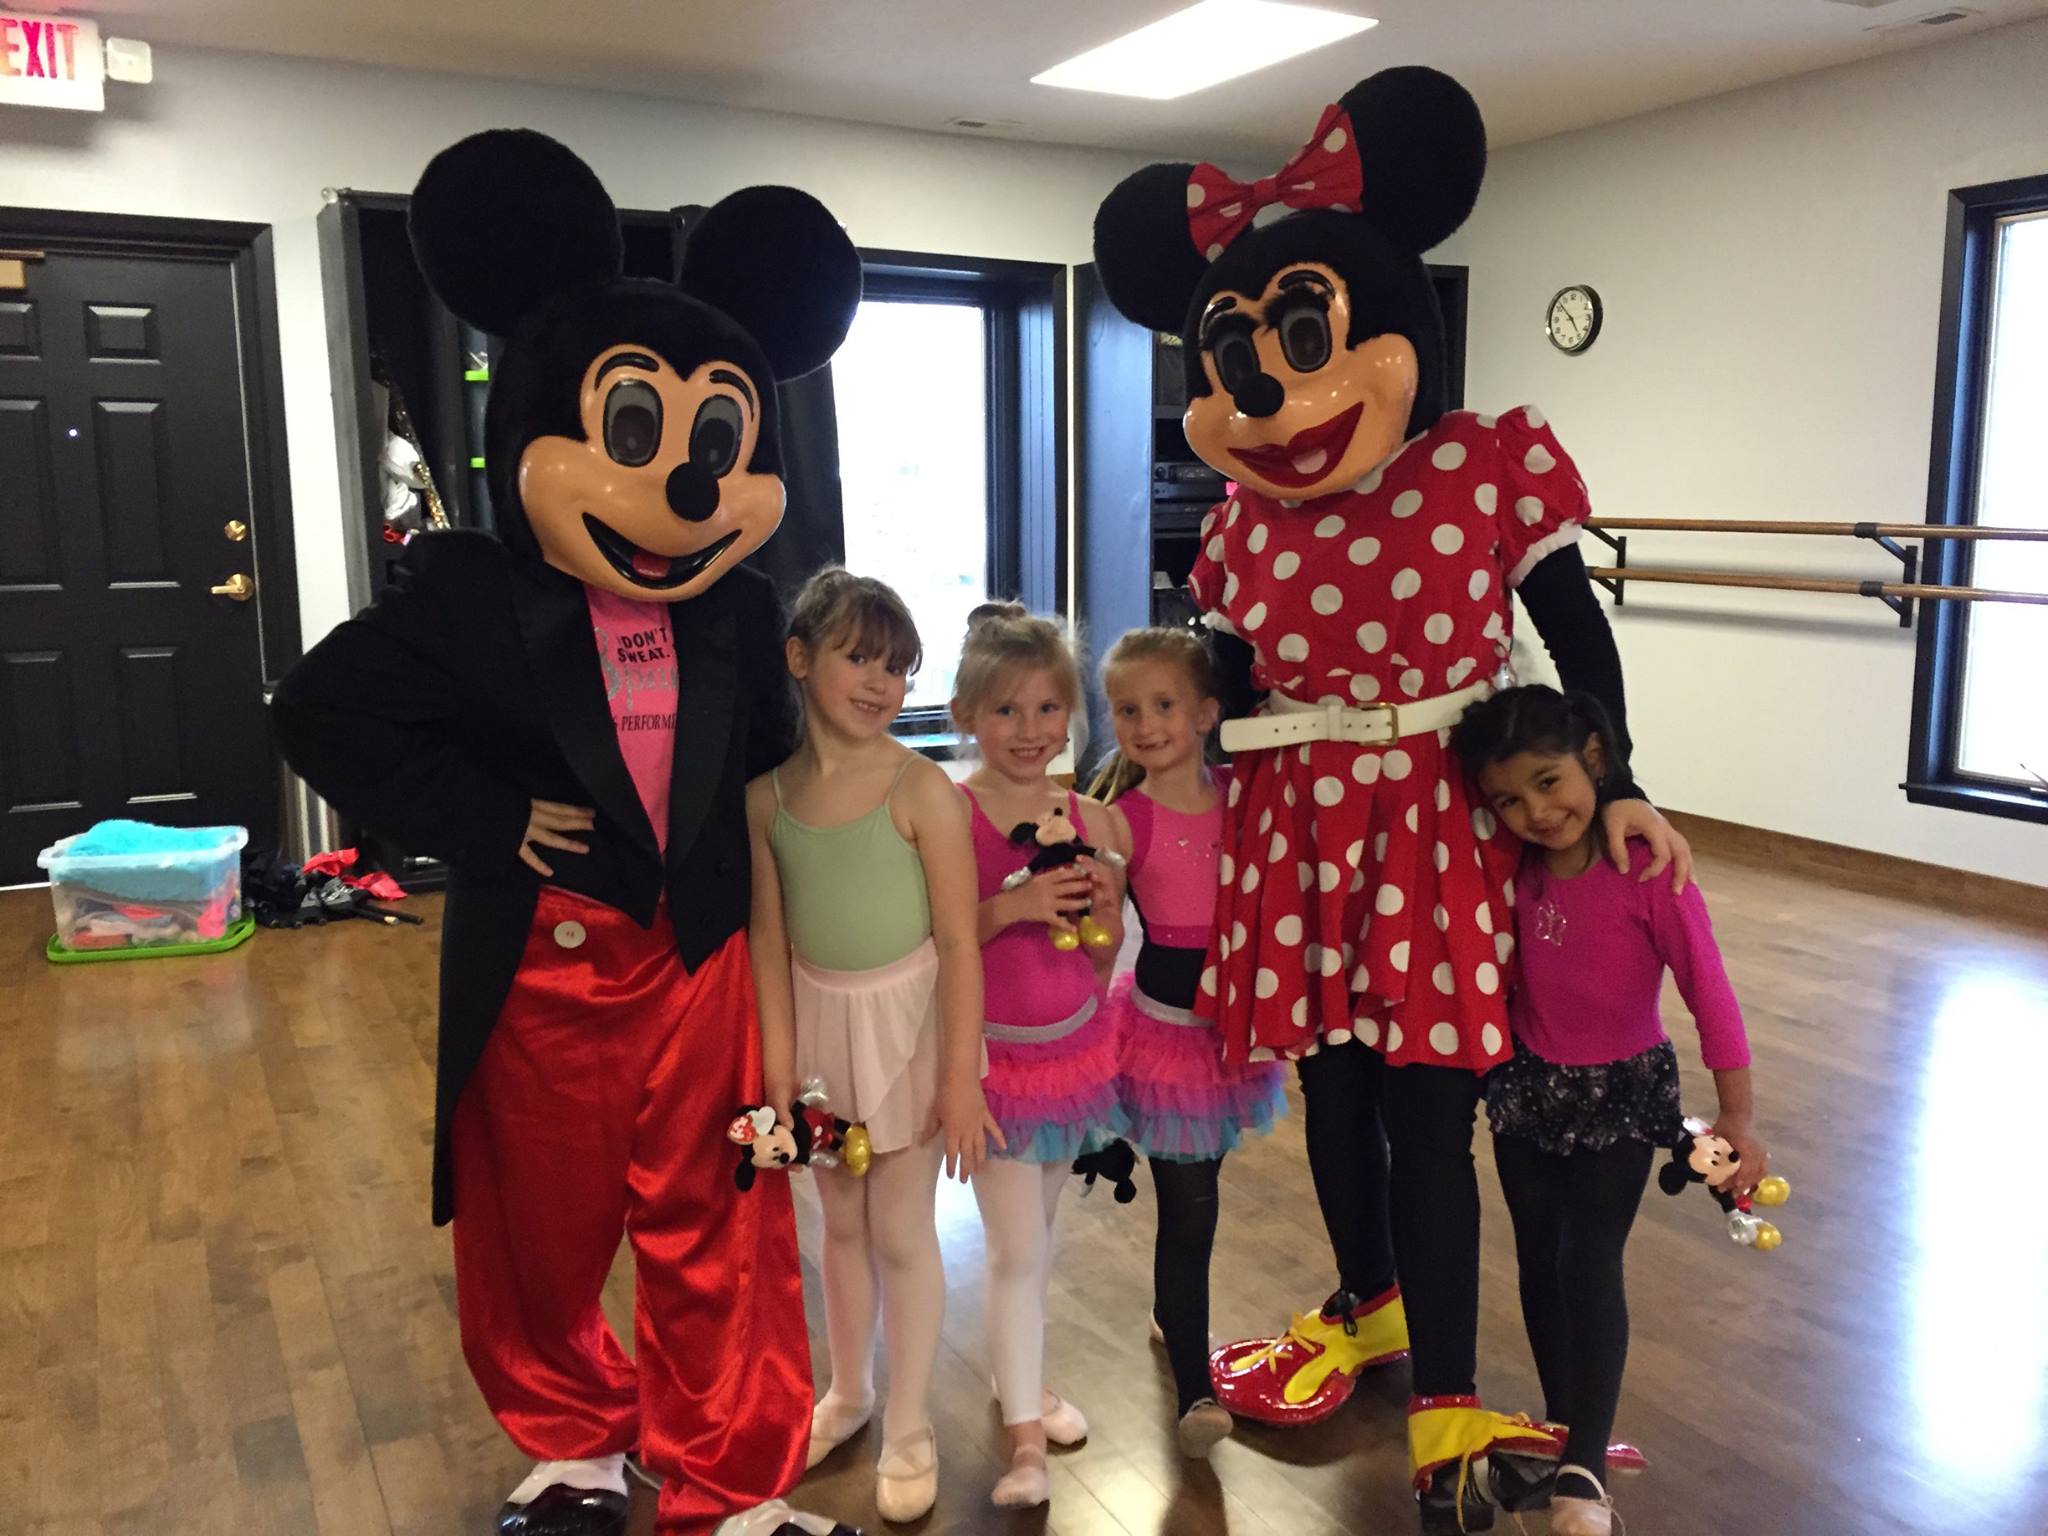 Smiling kids standing with Mickey and Minnie Mouse